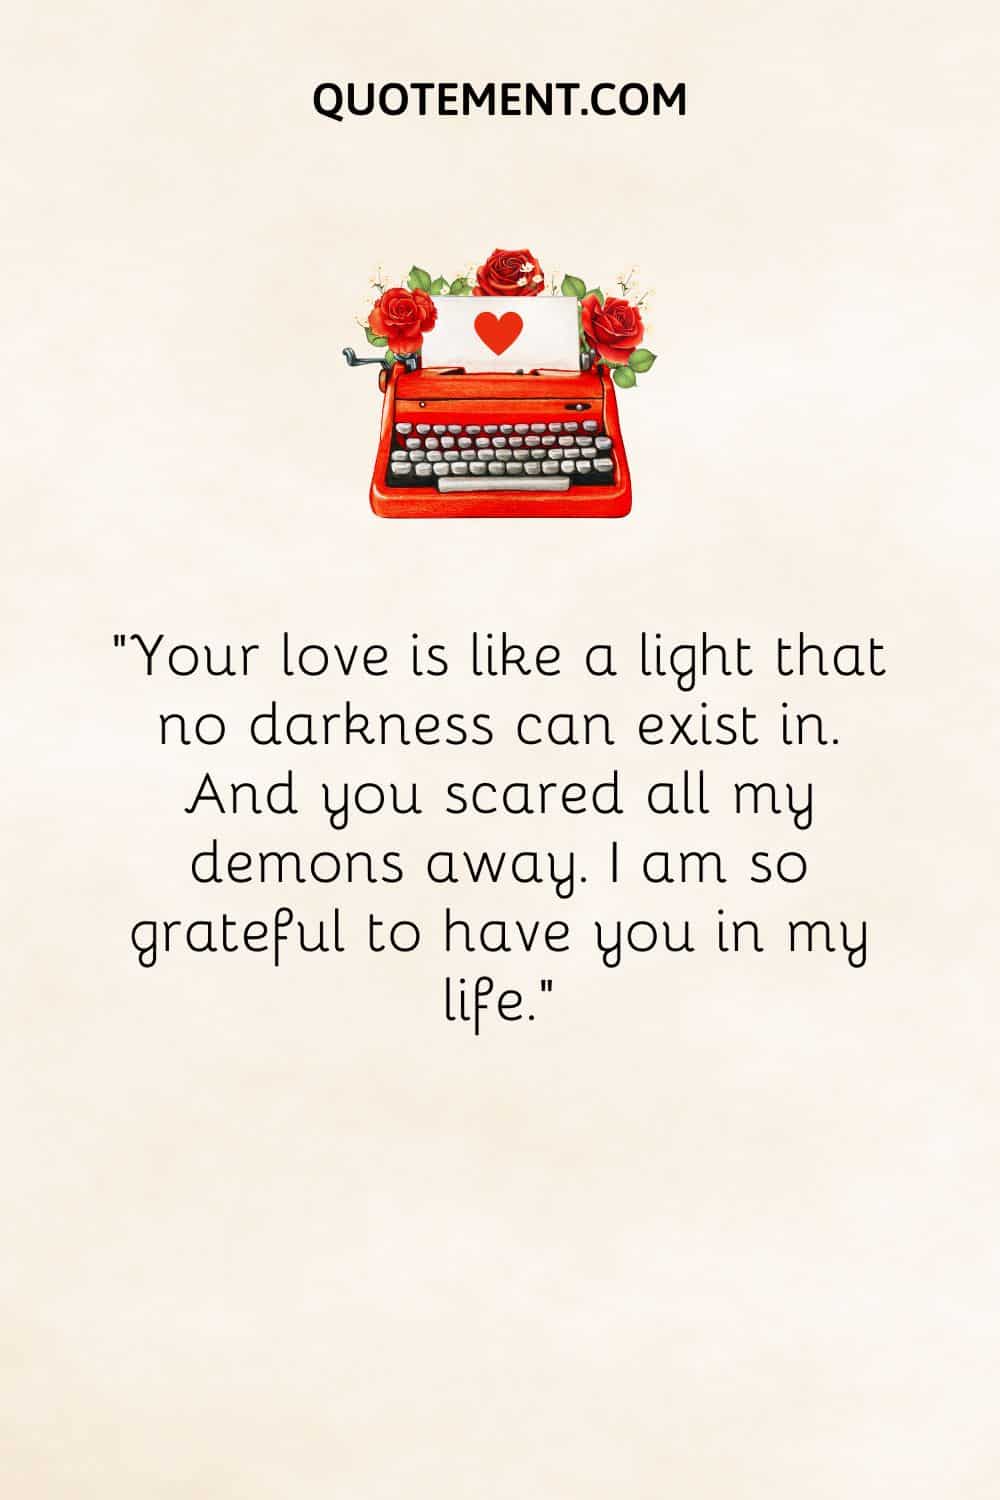 “Your love is like a light that no darkness can exist in. And you scared all my demons away. I am so grateful to have you in my life.”